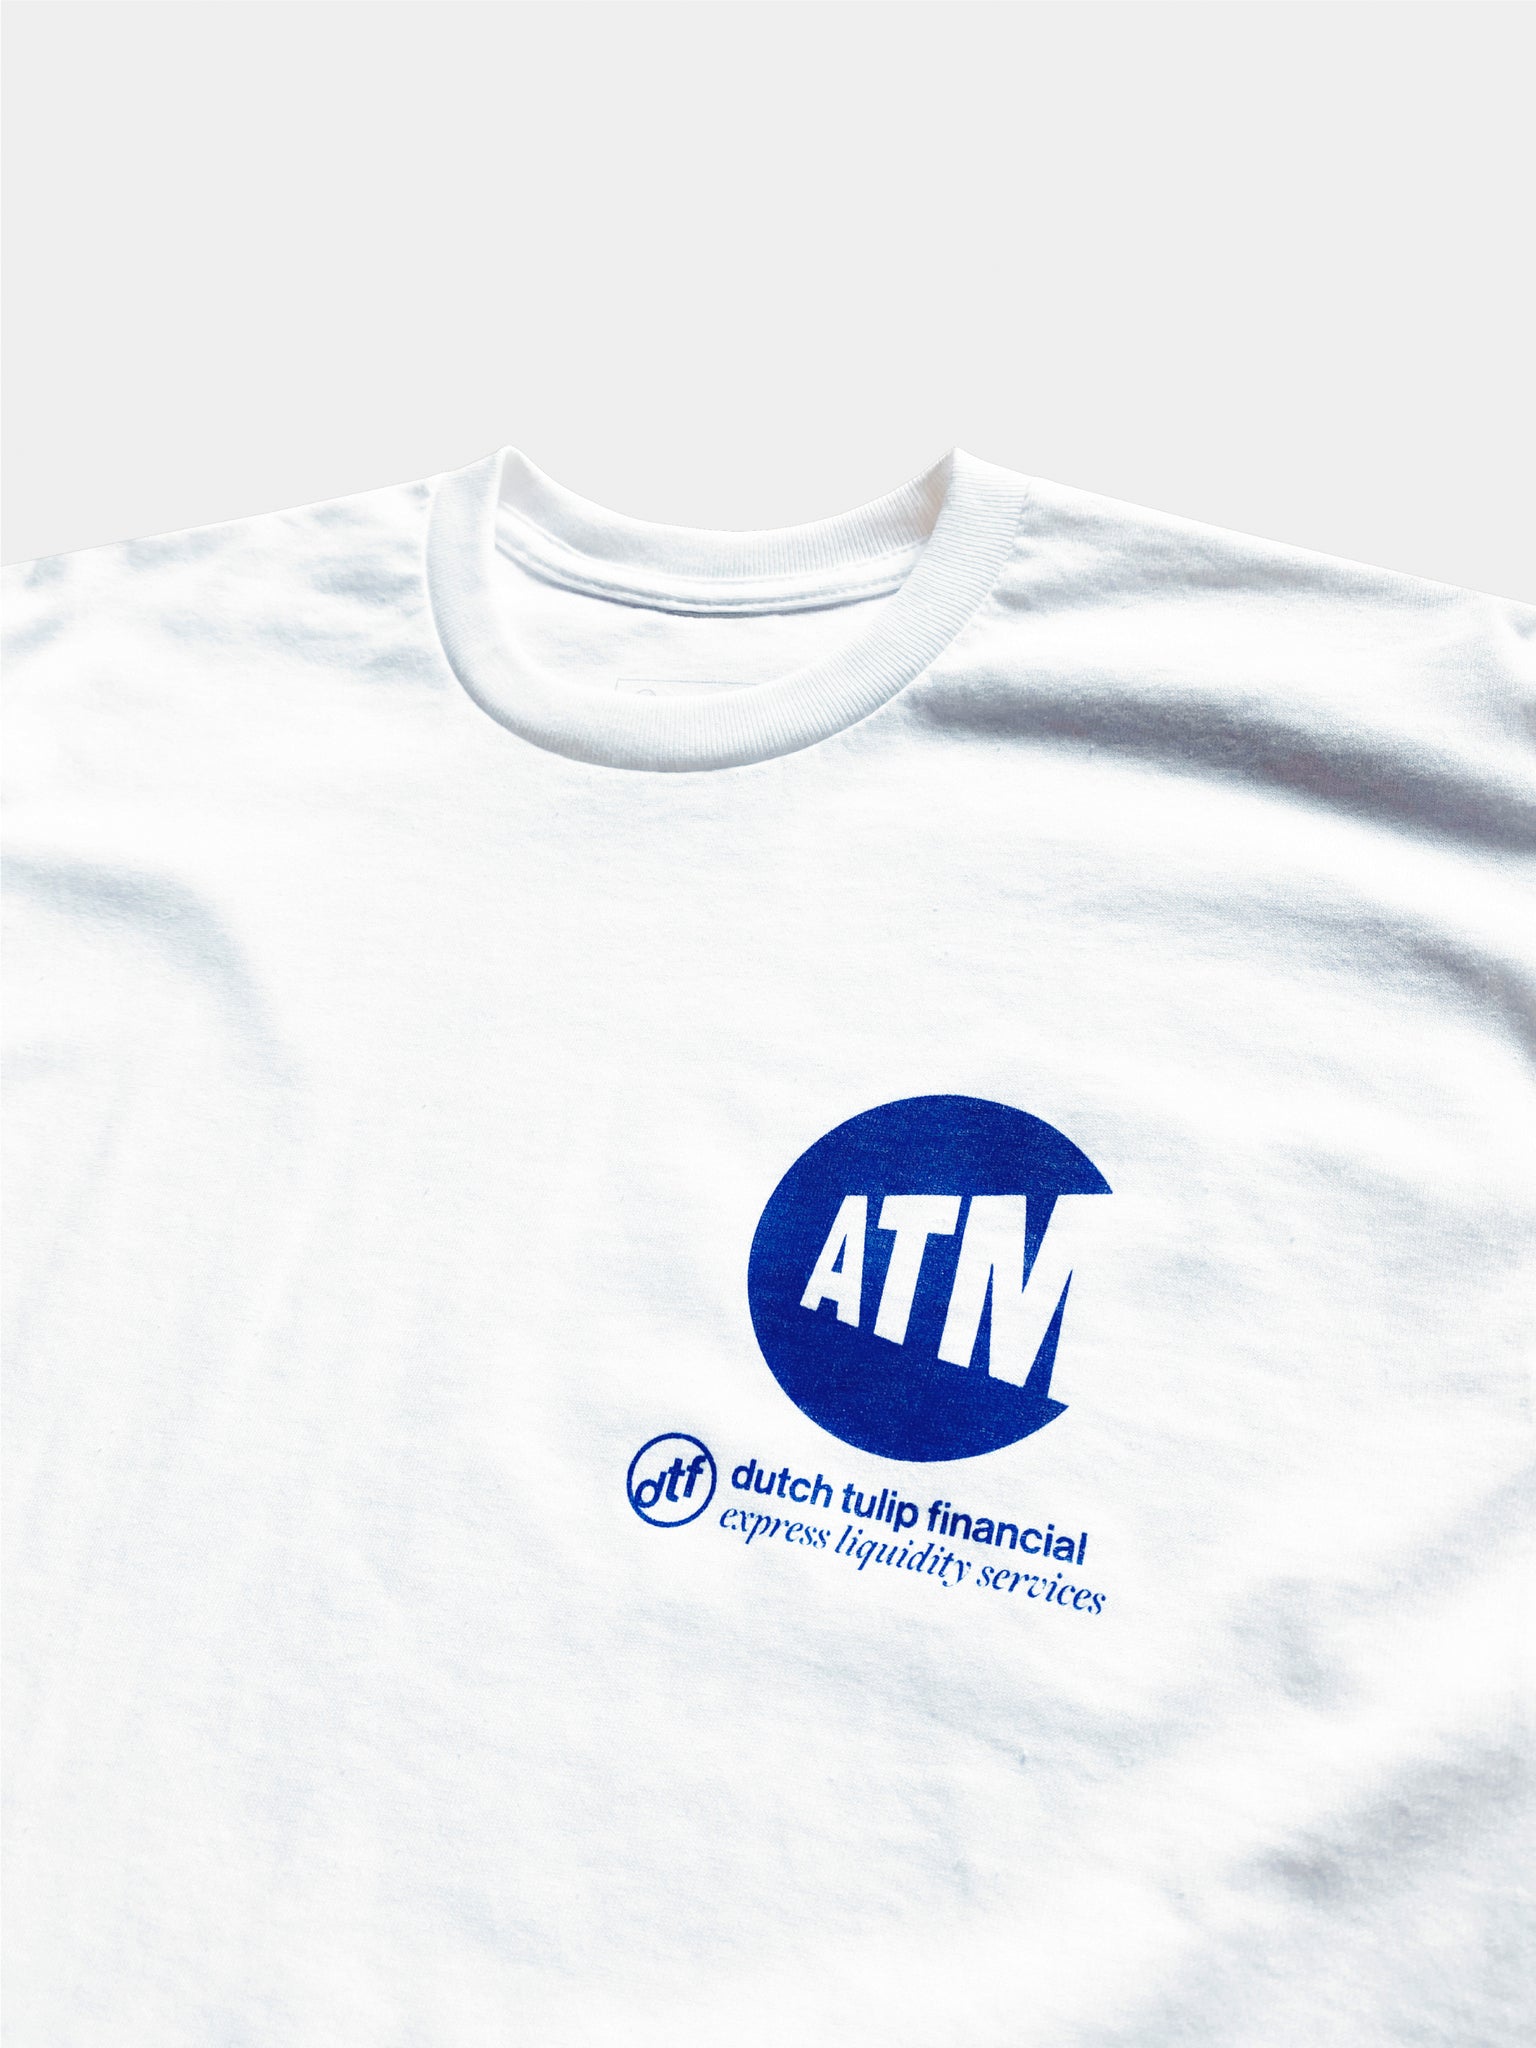 ATM Cash Only Tee - White